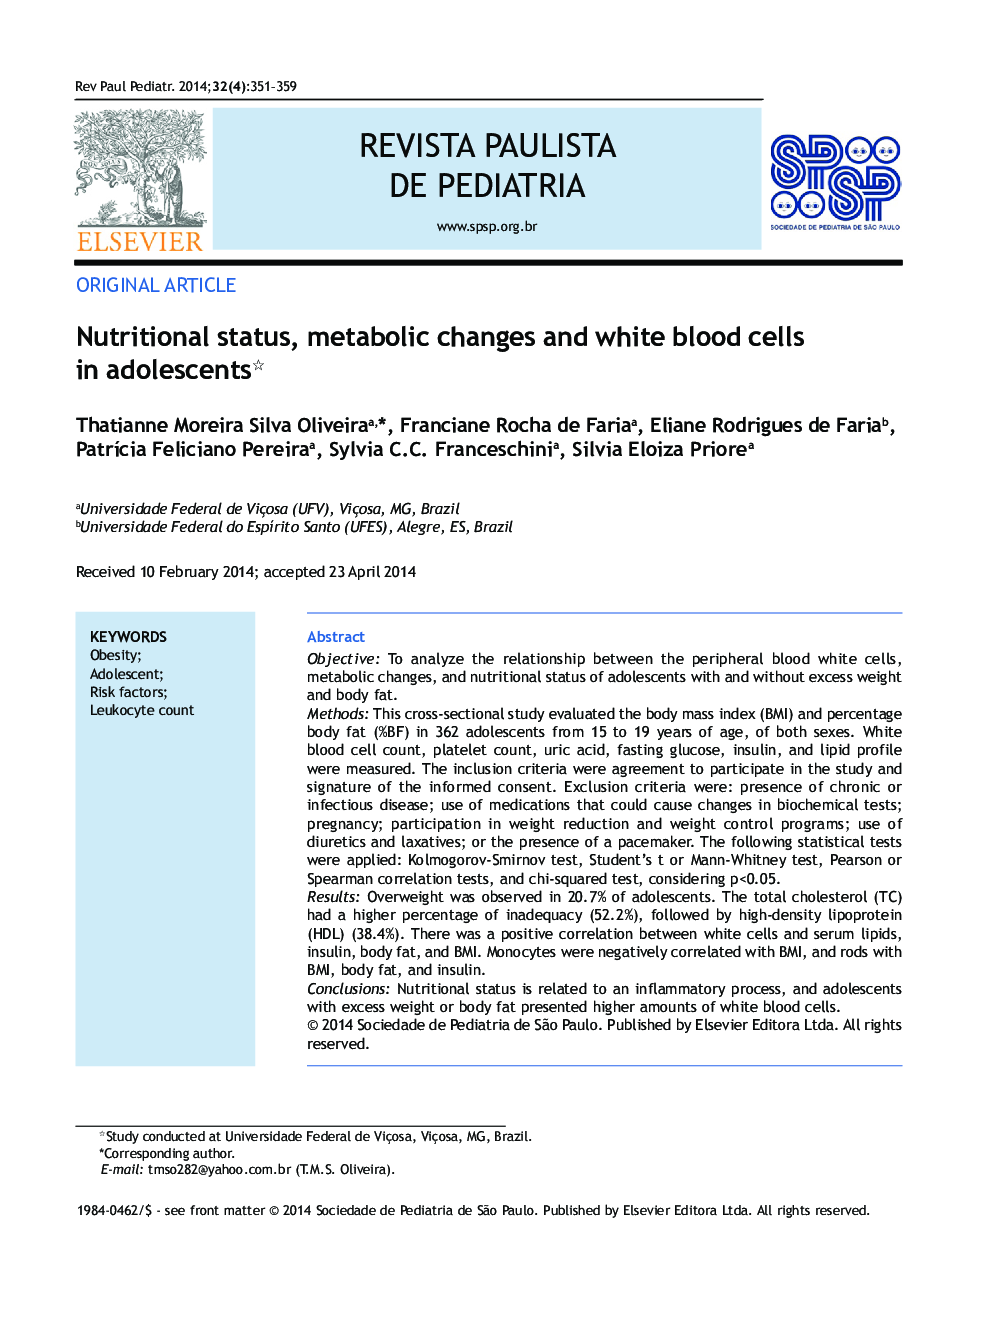 Nutritional status, metabolic changes and white blood cells in adolescents*